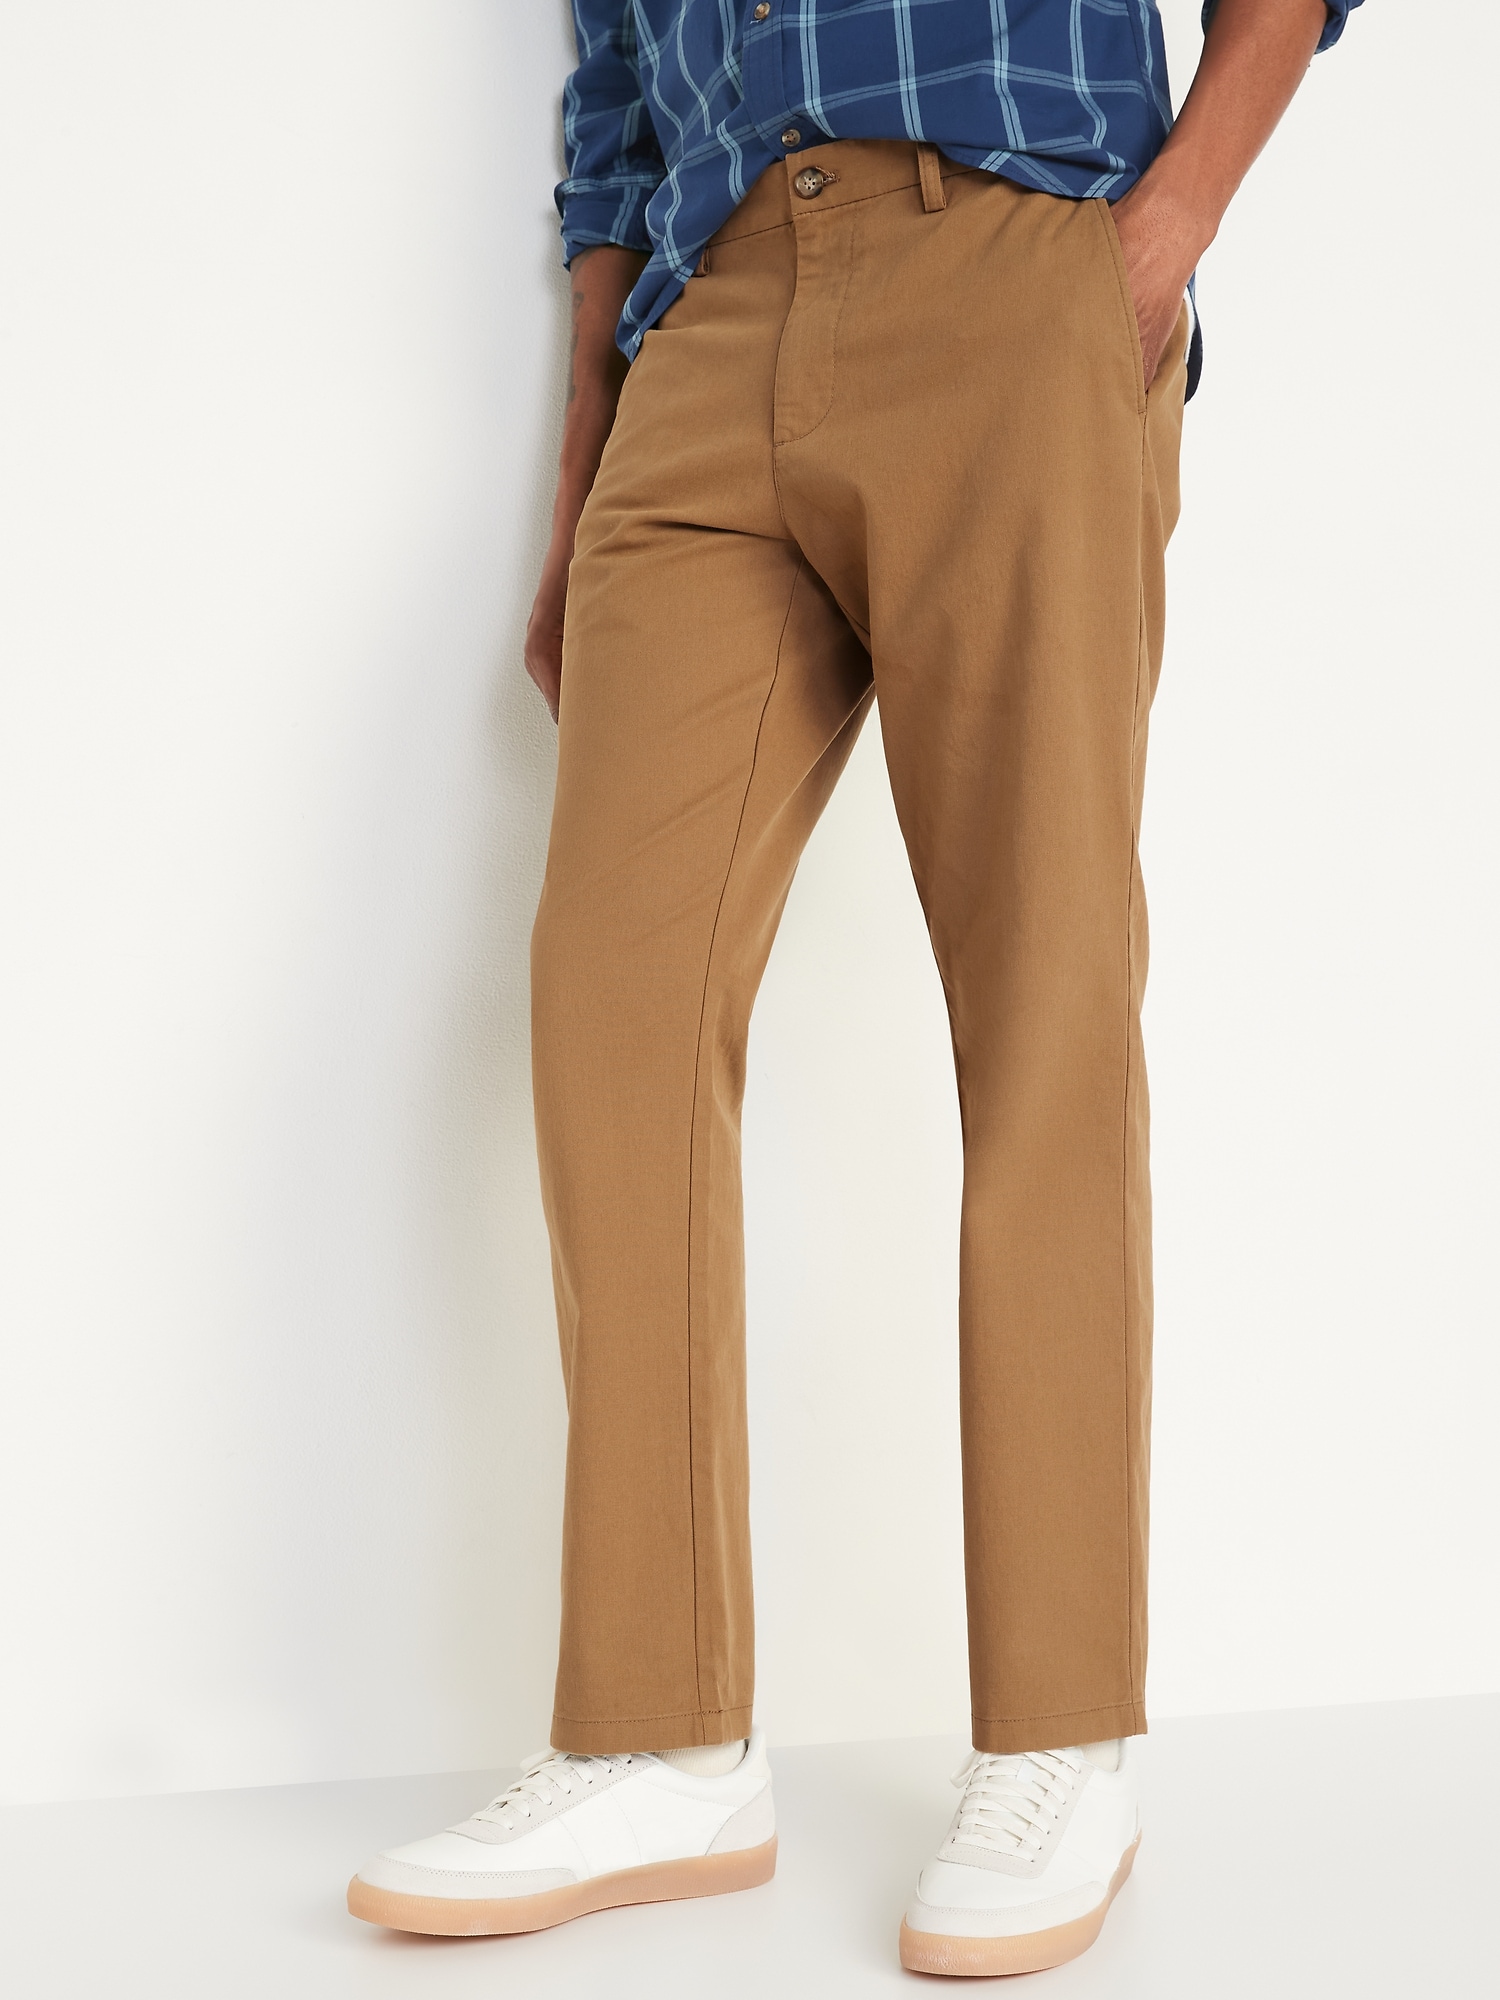 Old Navy Straight Built-In Flex Rotation Chino Pants brown. 1